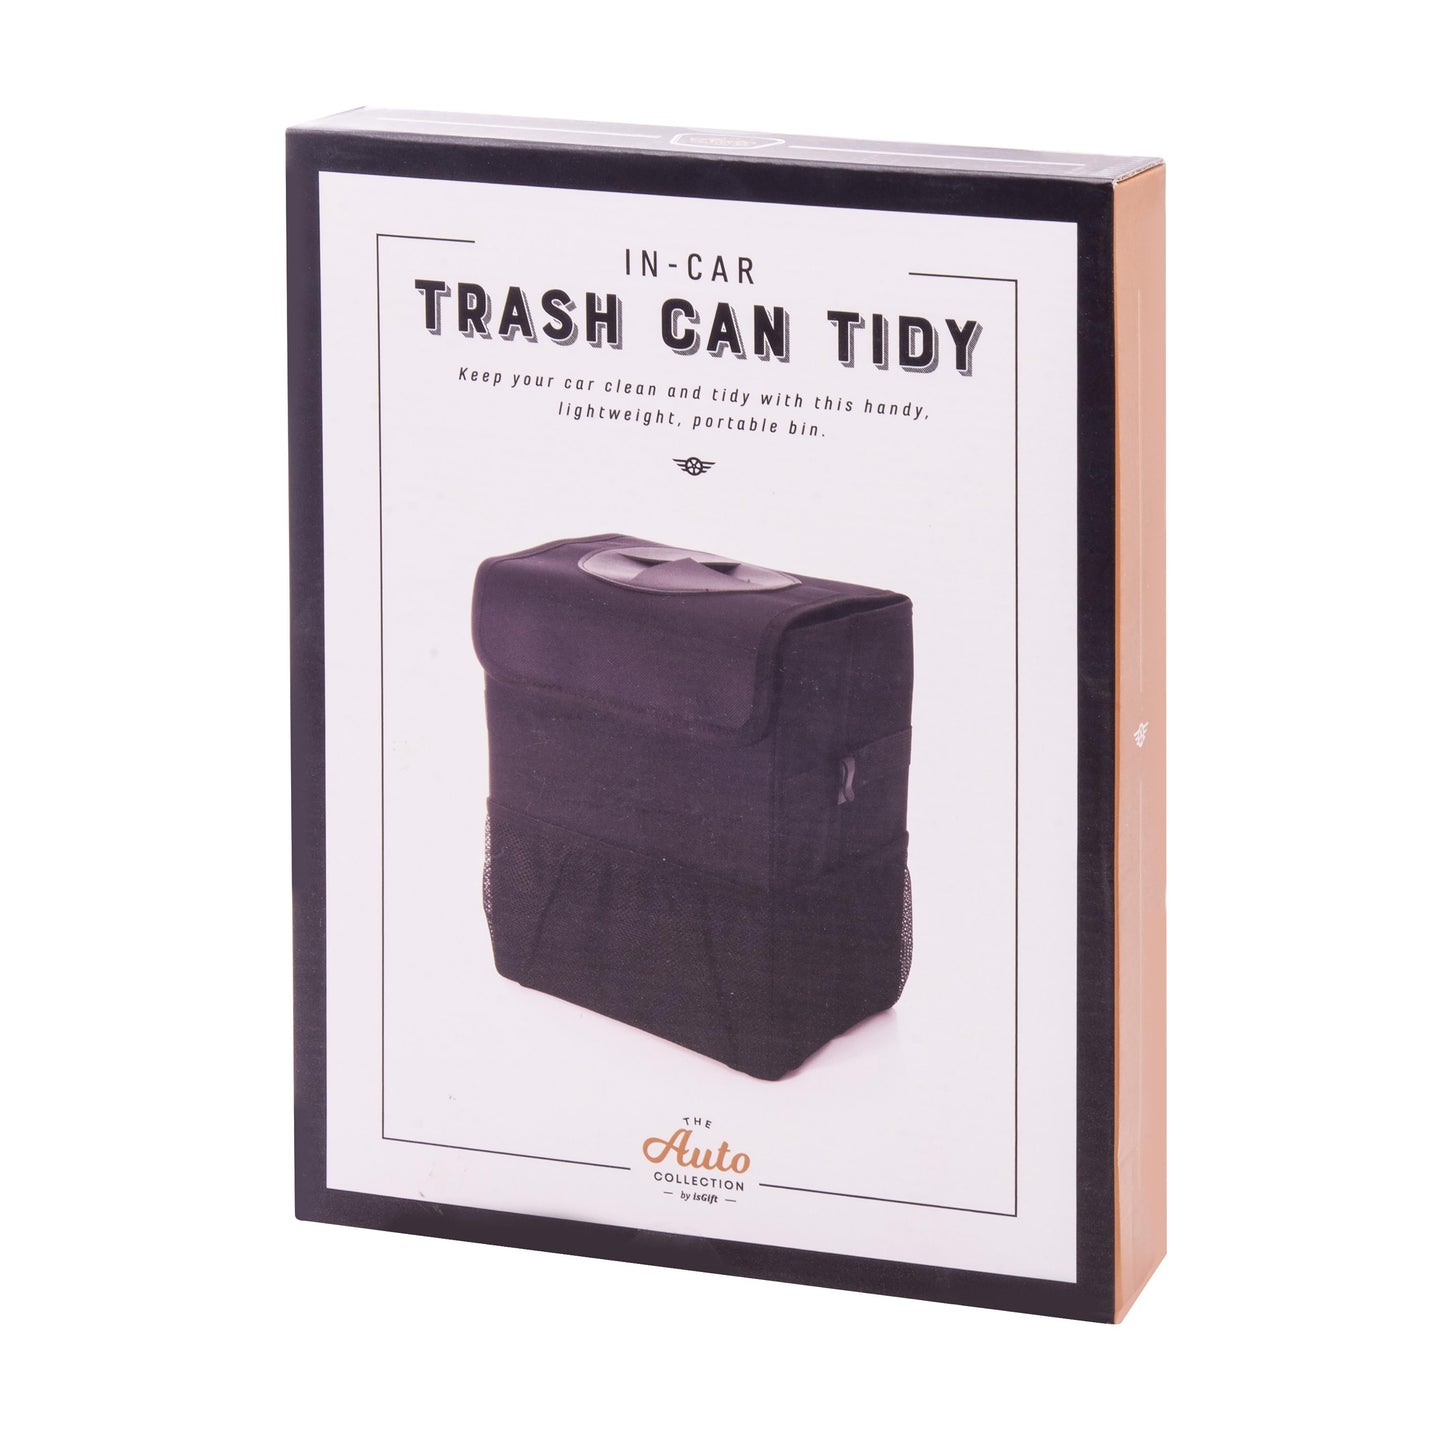 THE AUTO COLLECTION - TRASH CAN TIDY